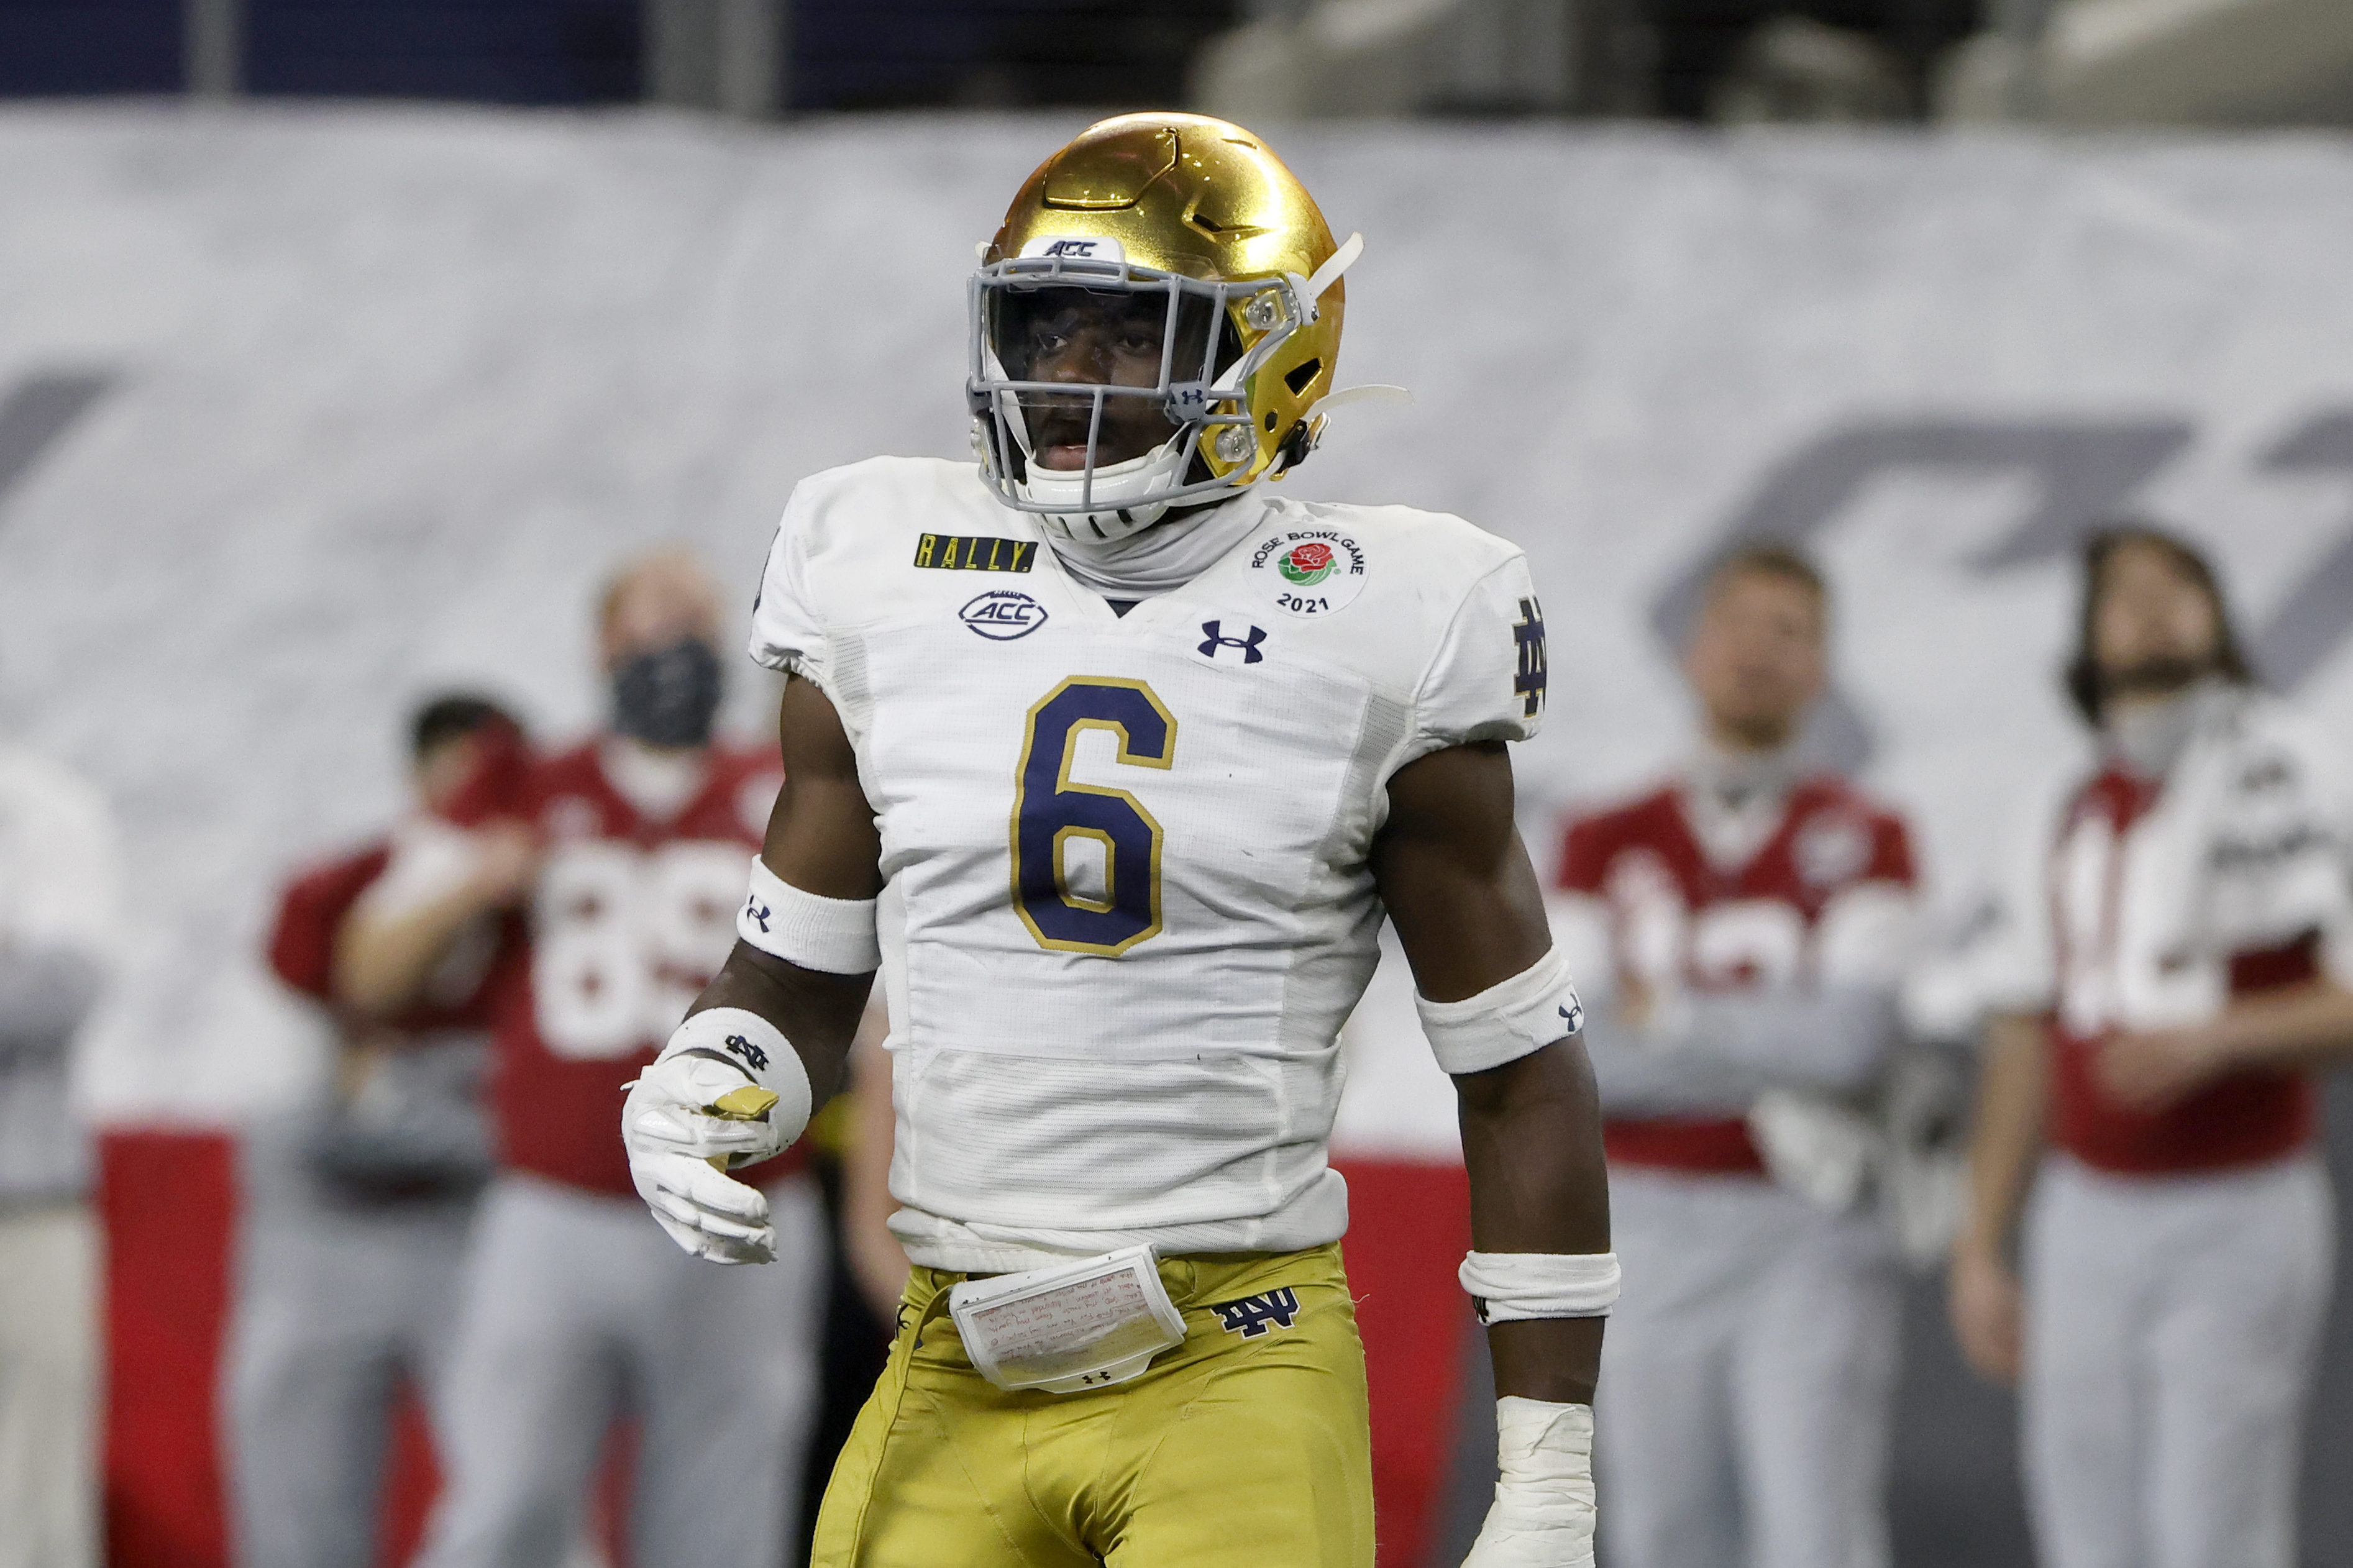 Notre Dame Football: JOK rated best coverage LB in 2021 NFL Draft